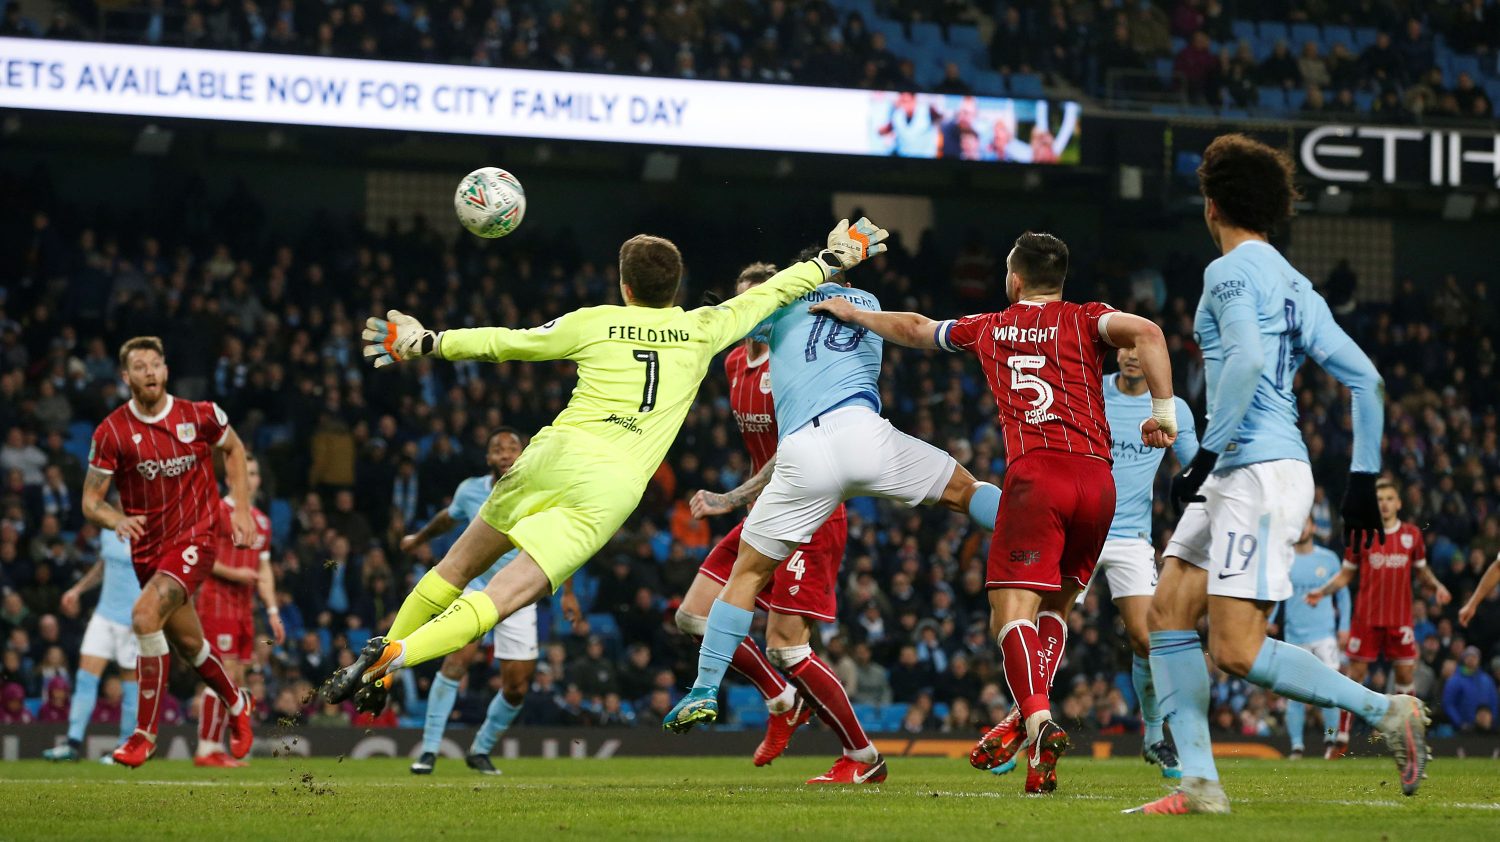 Manchester City’s Sergio Aguero scores their second goal (REUTERS/Andrew Yates)